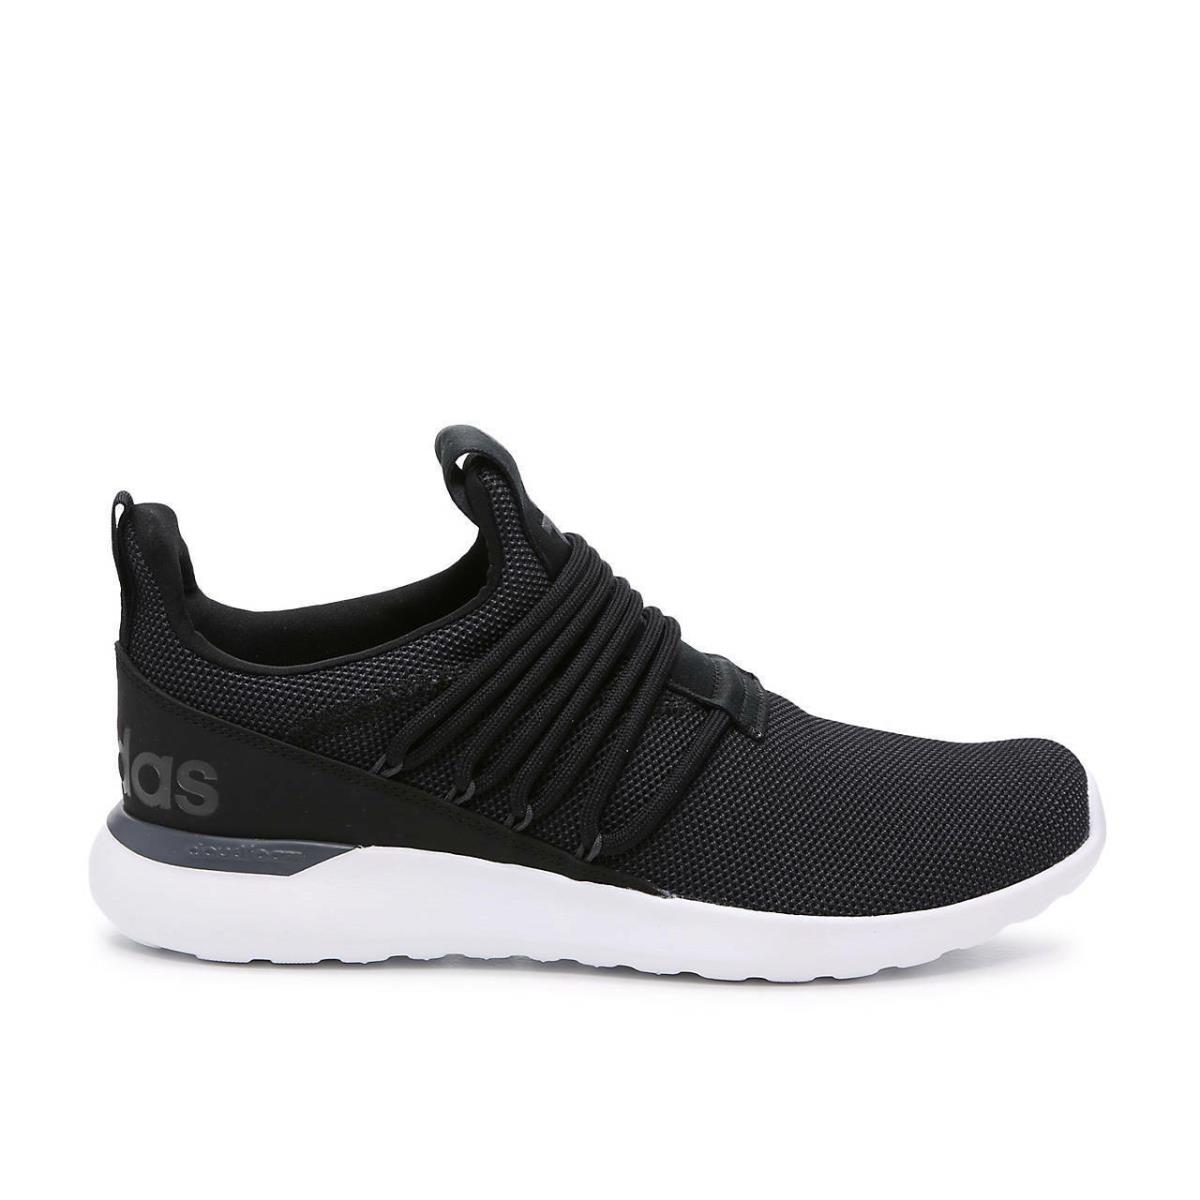 Adidas shoes LITE RACER ADAPT 6